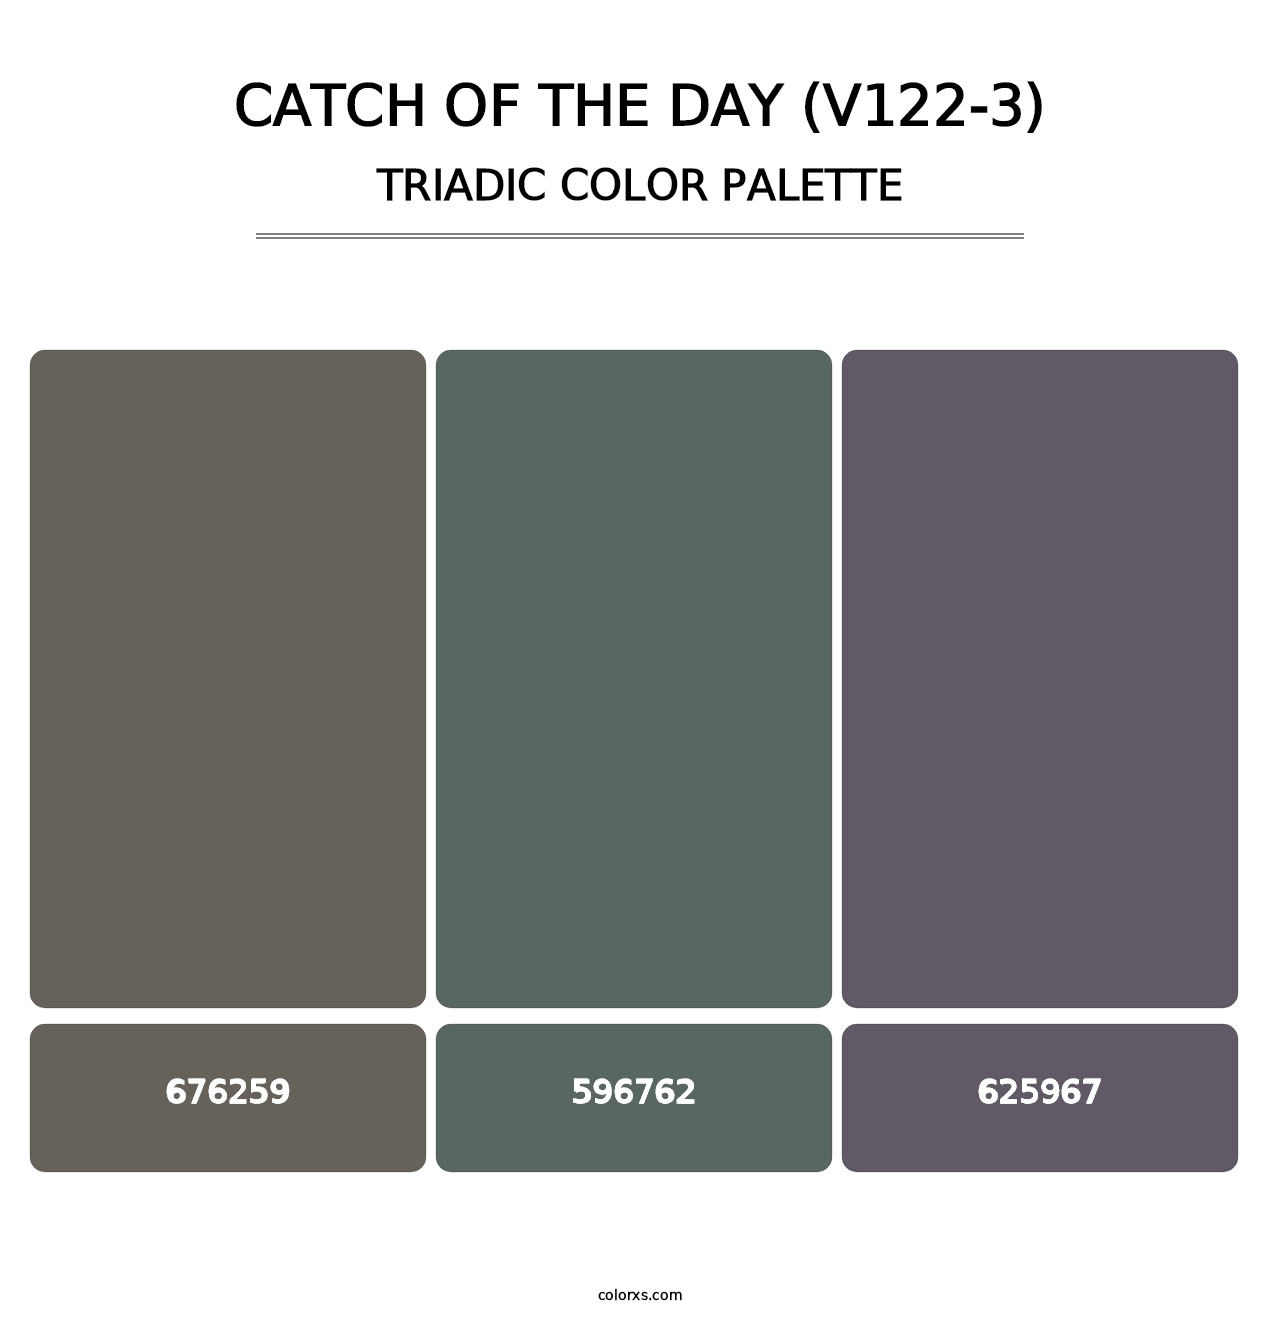 Catch of the Day (V122-3) - Triadic Color Palette